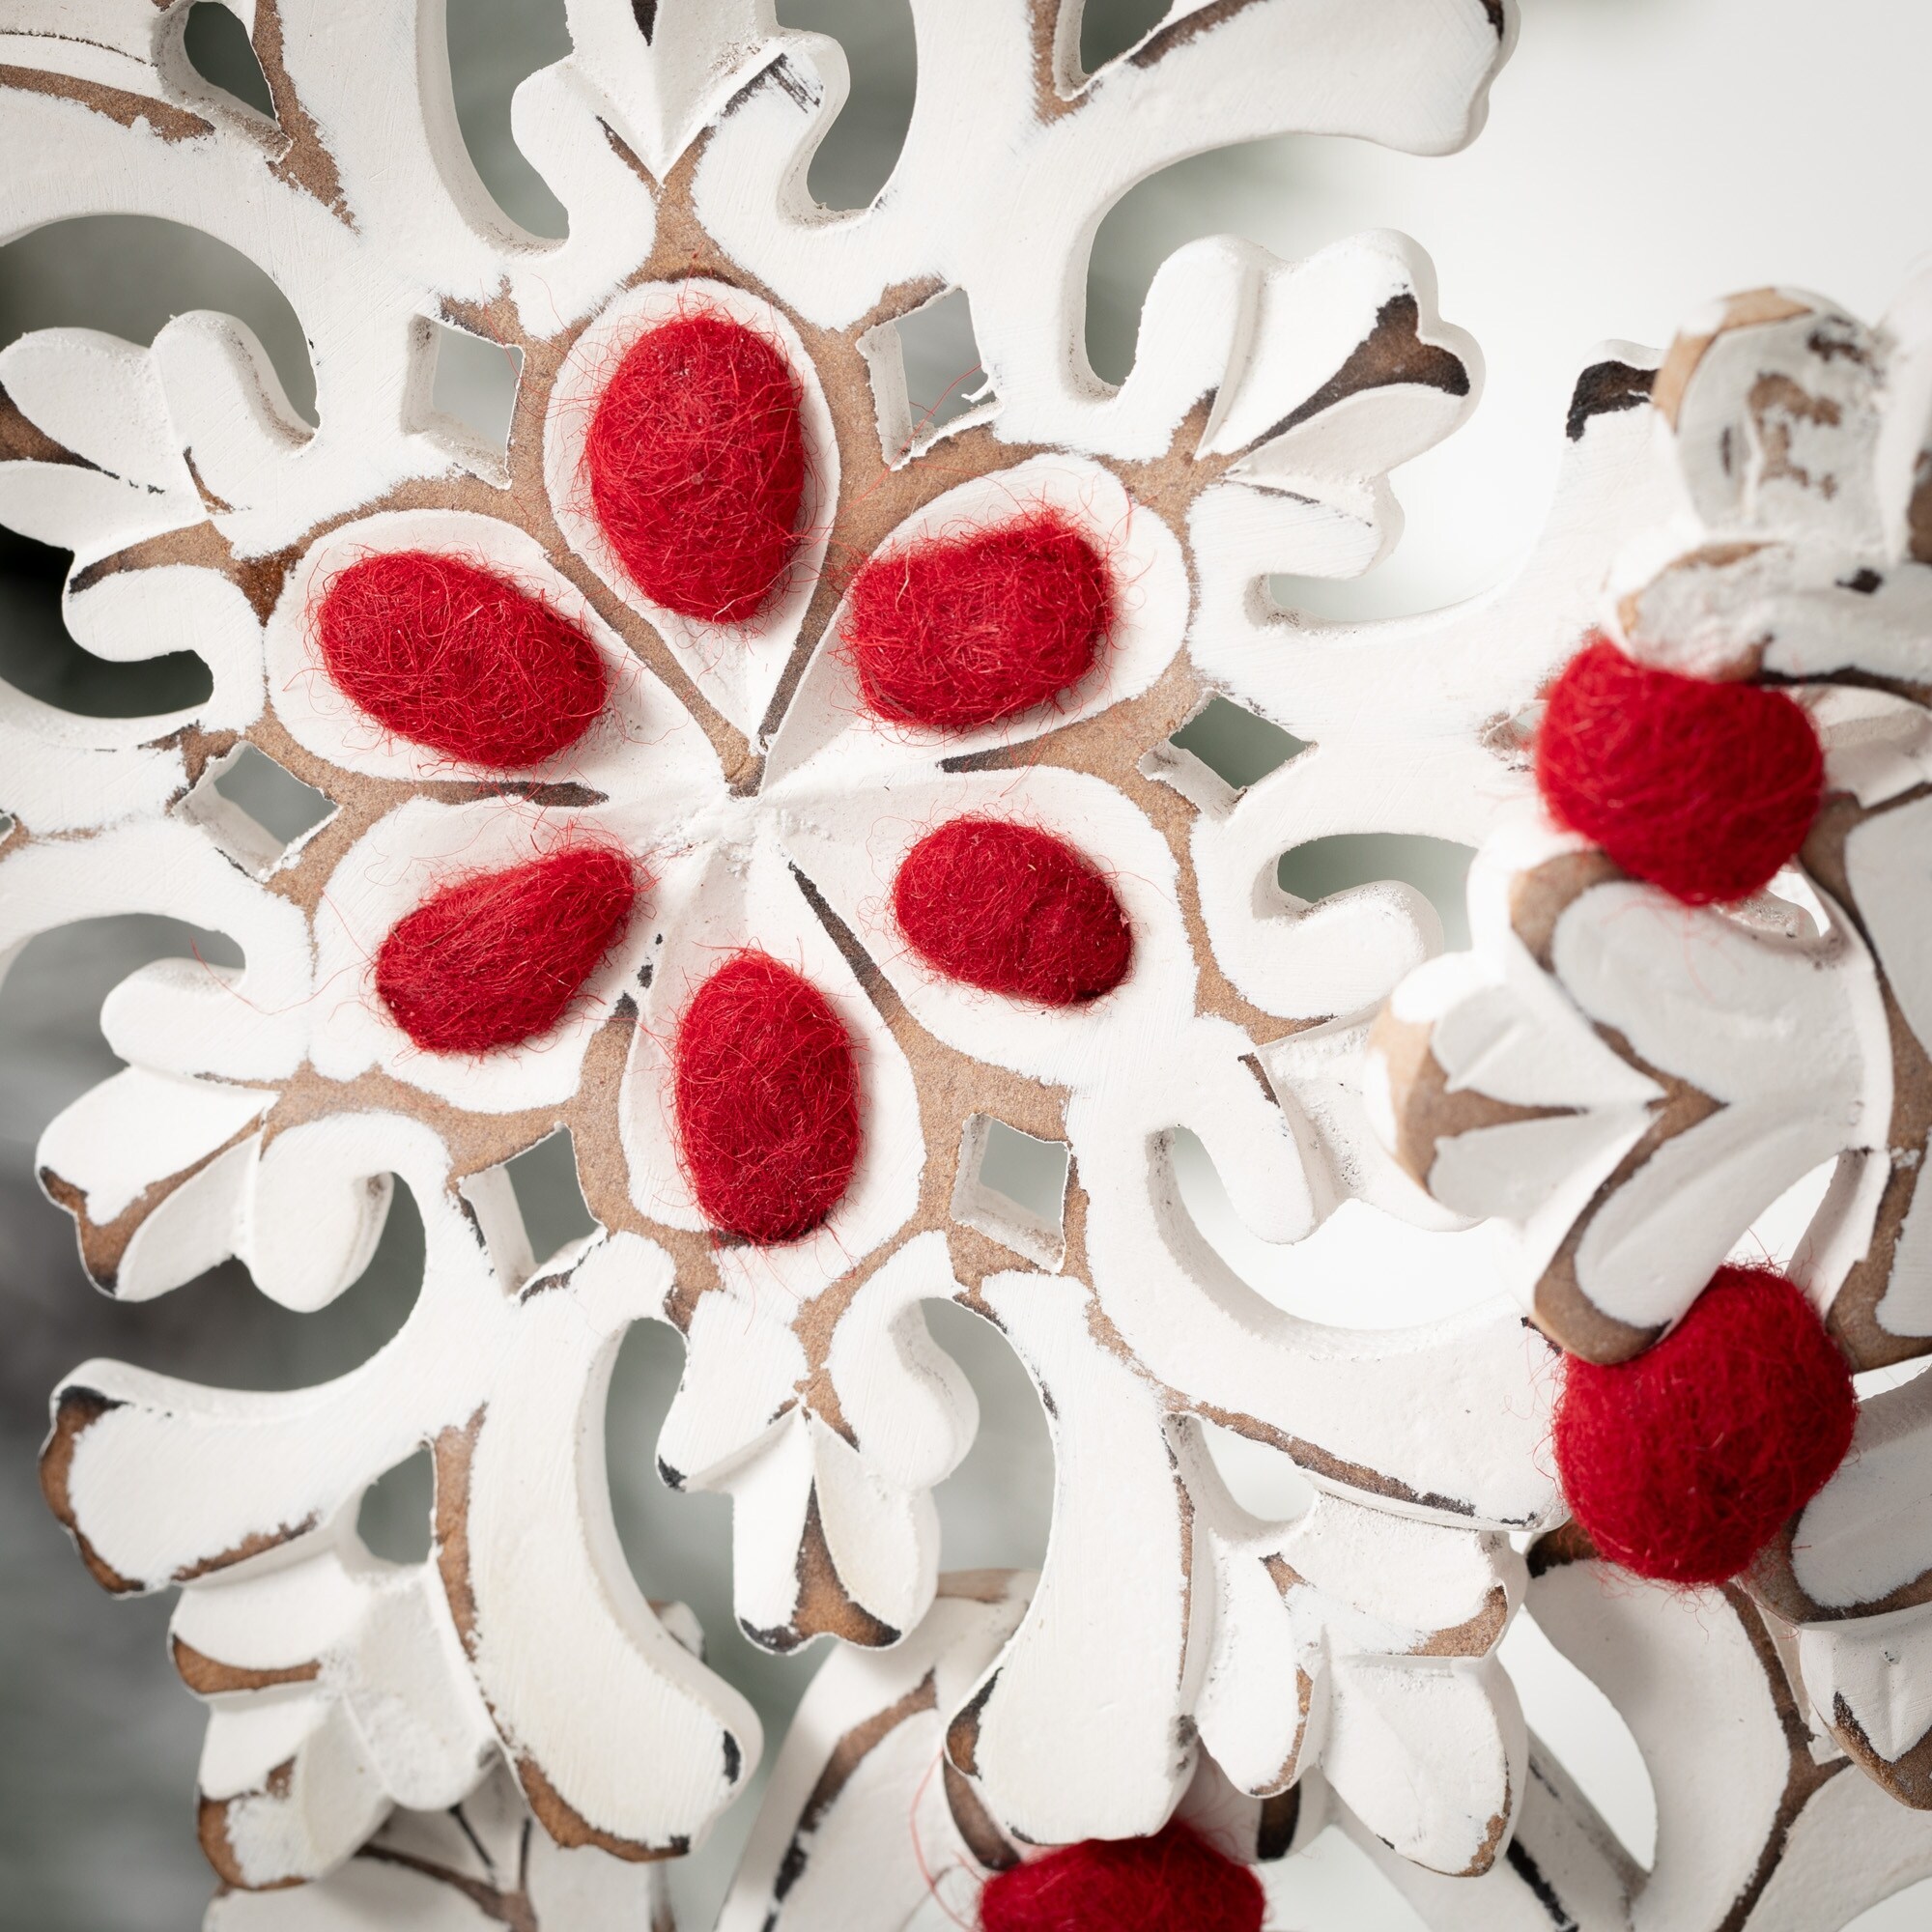 4H, 6.25H and 8.5H Sullivans Snowflake Ornament - Set of 3, White  Christmas Ornaments - On Sale - Bed Bath & Beyond - 38316733